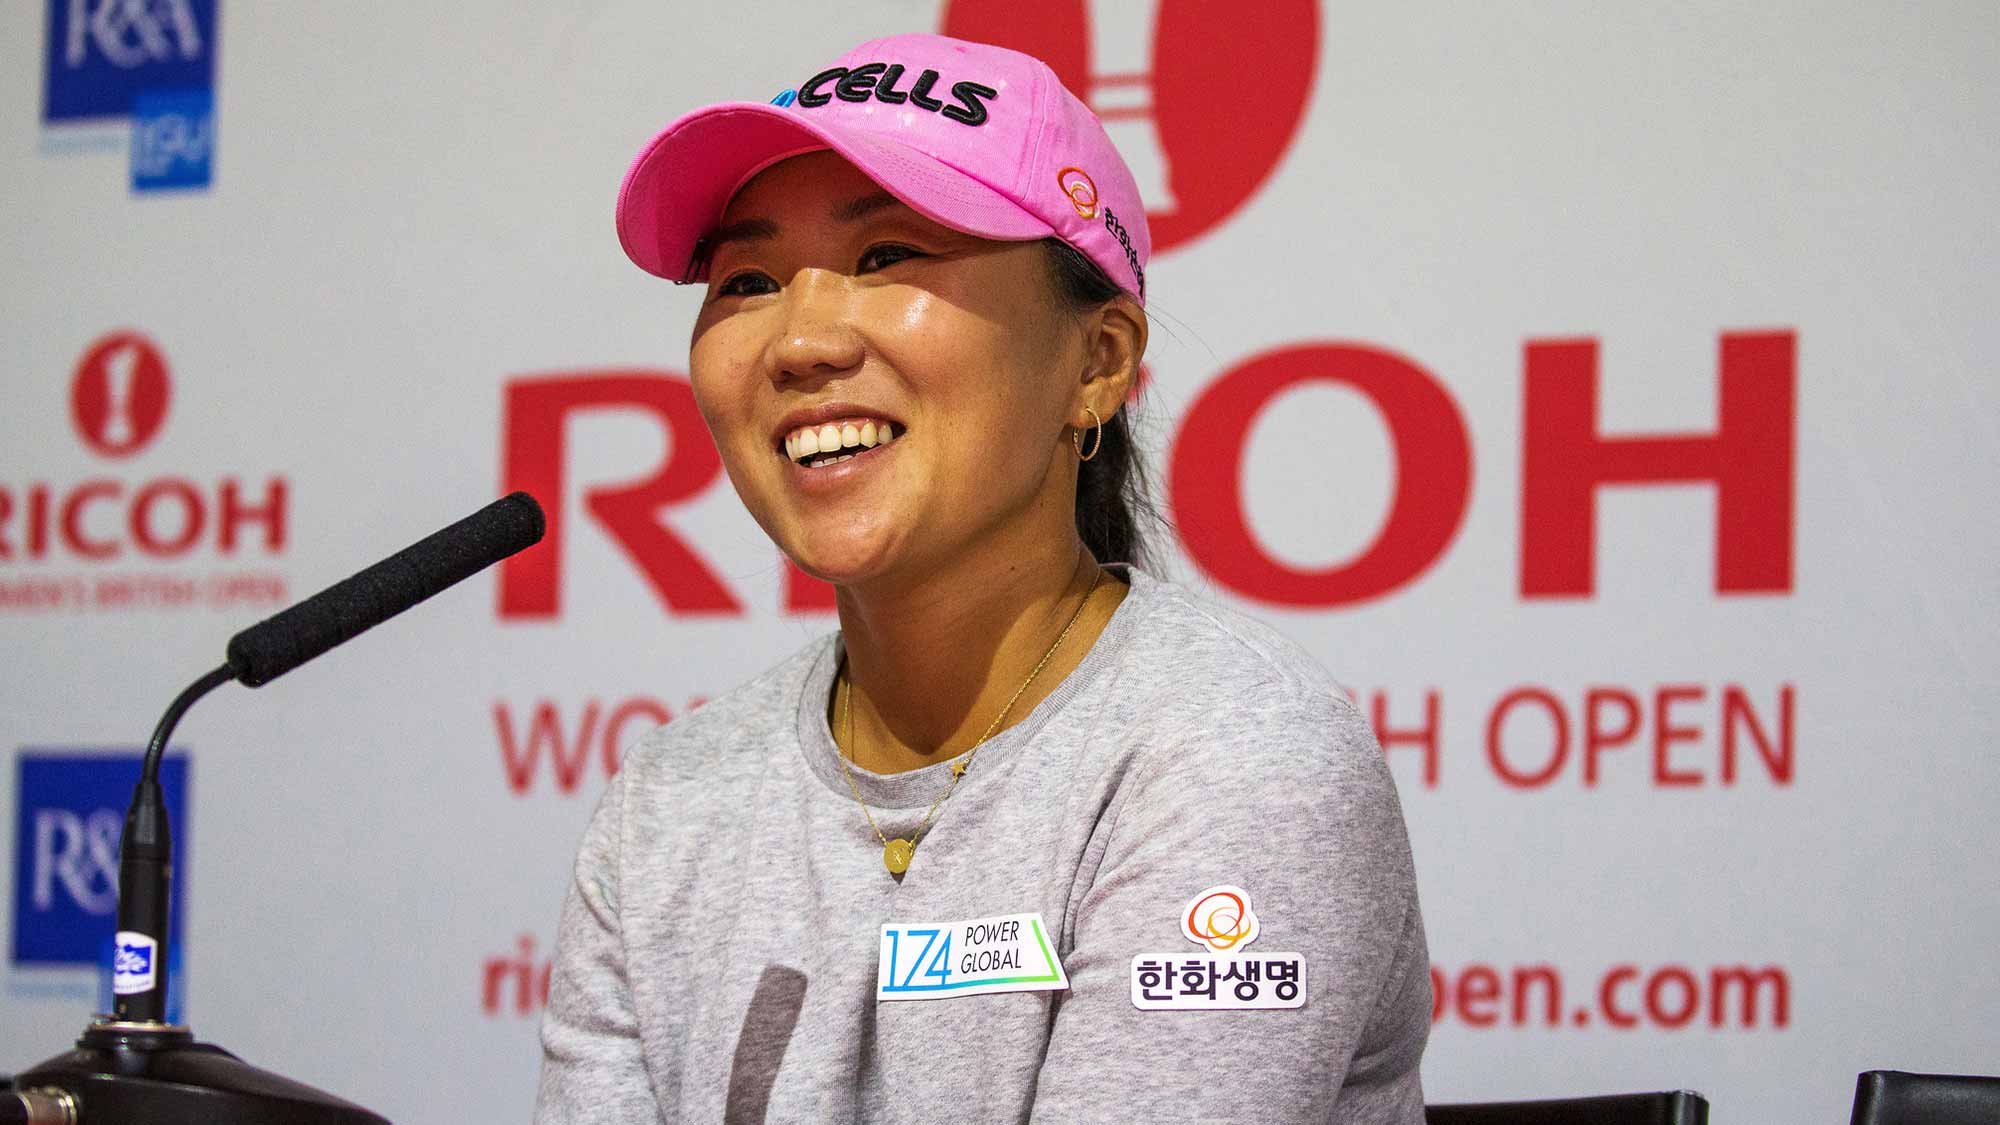 Defending Champion In-Kyung Kim Meets With the Media Ahead of the 2018 Ricoh Women's British Open